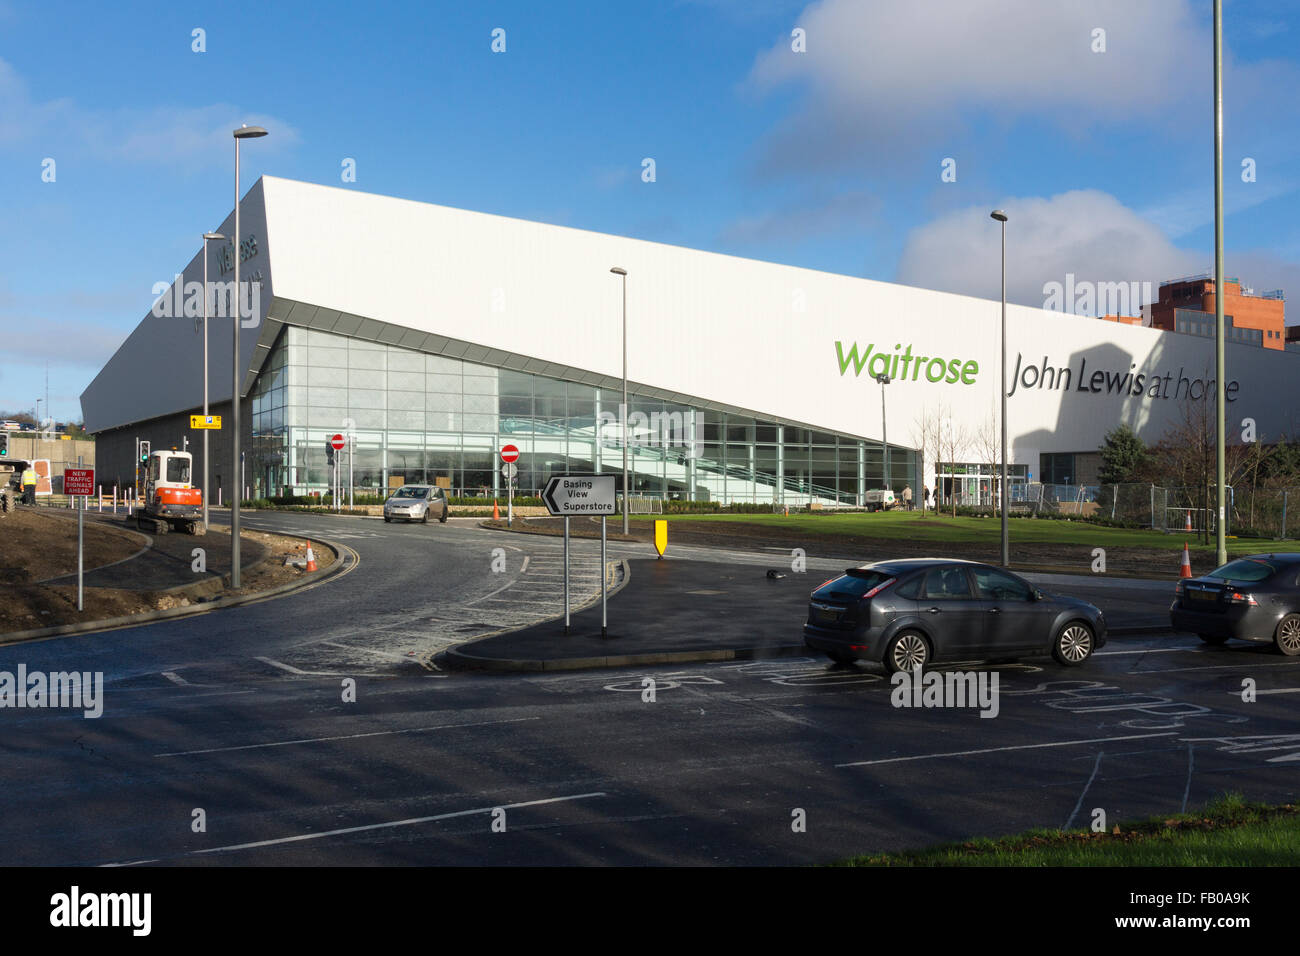 The Waitrose and John Lewis at Home combined superstore in Basingstoke as viewed from Eastrop Roundabout Stock Photo